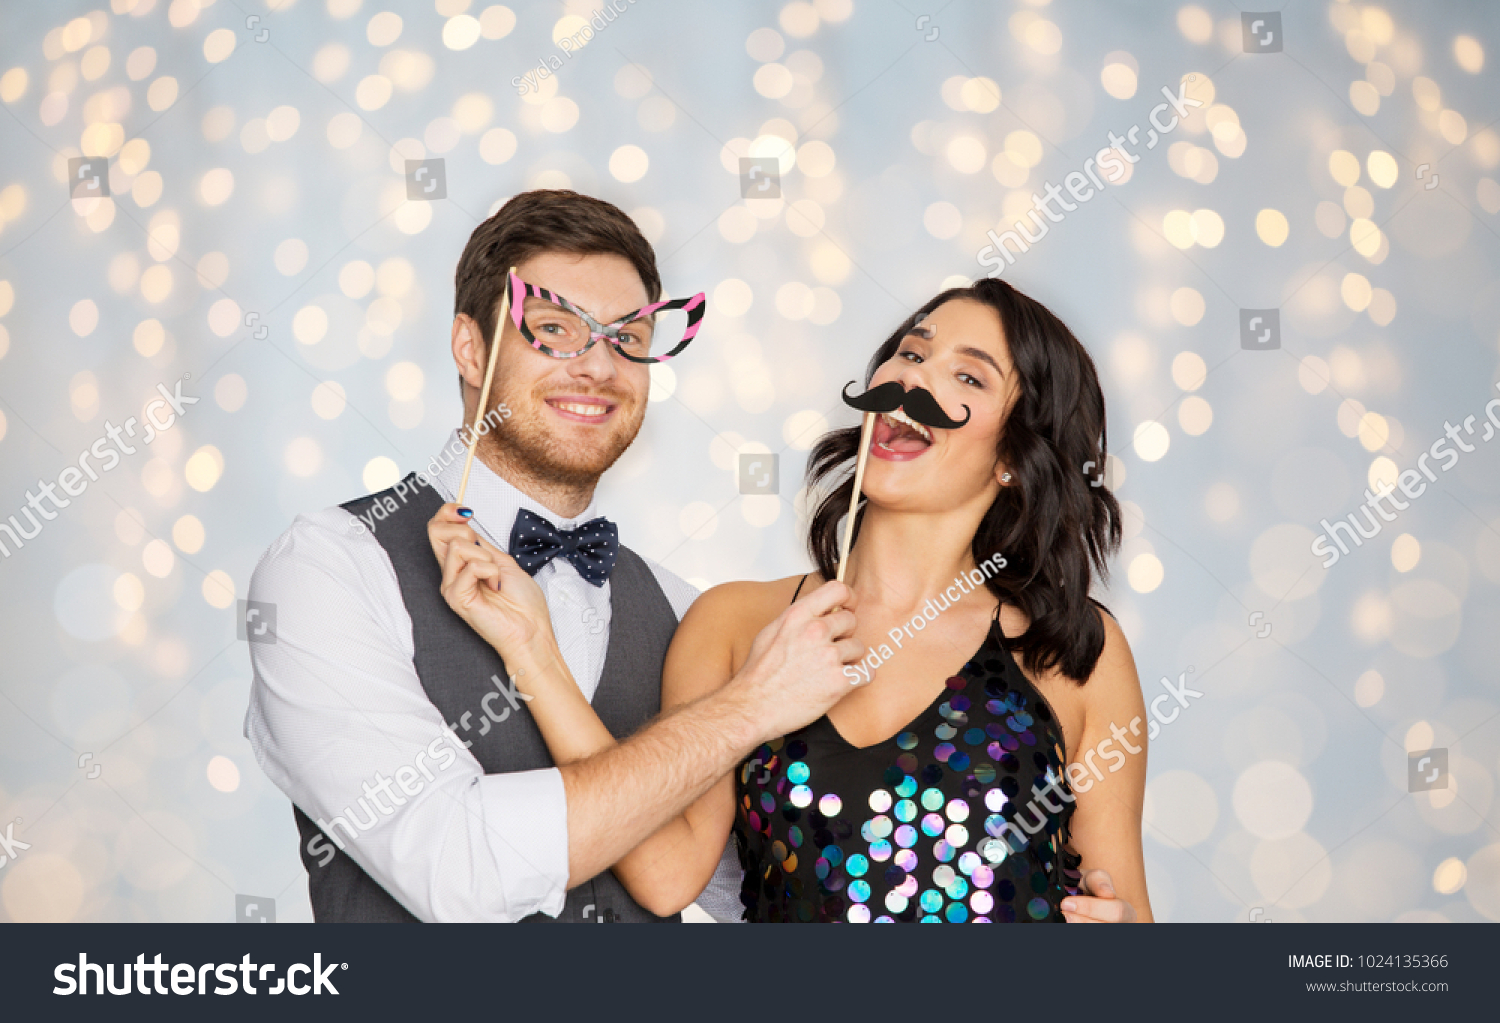 celebration, fun and holidays concept - happy couple posing with party props over festive lights background #1024135366